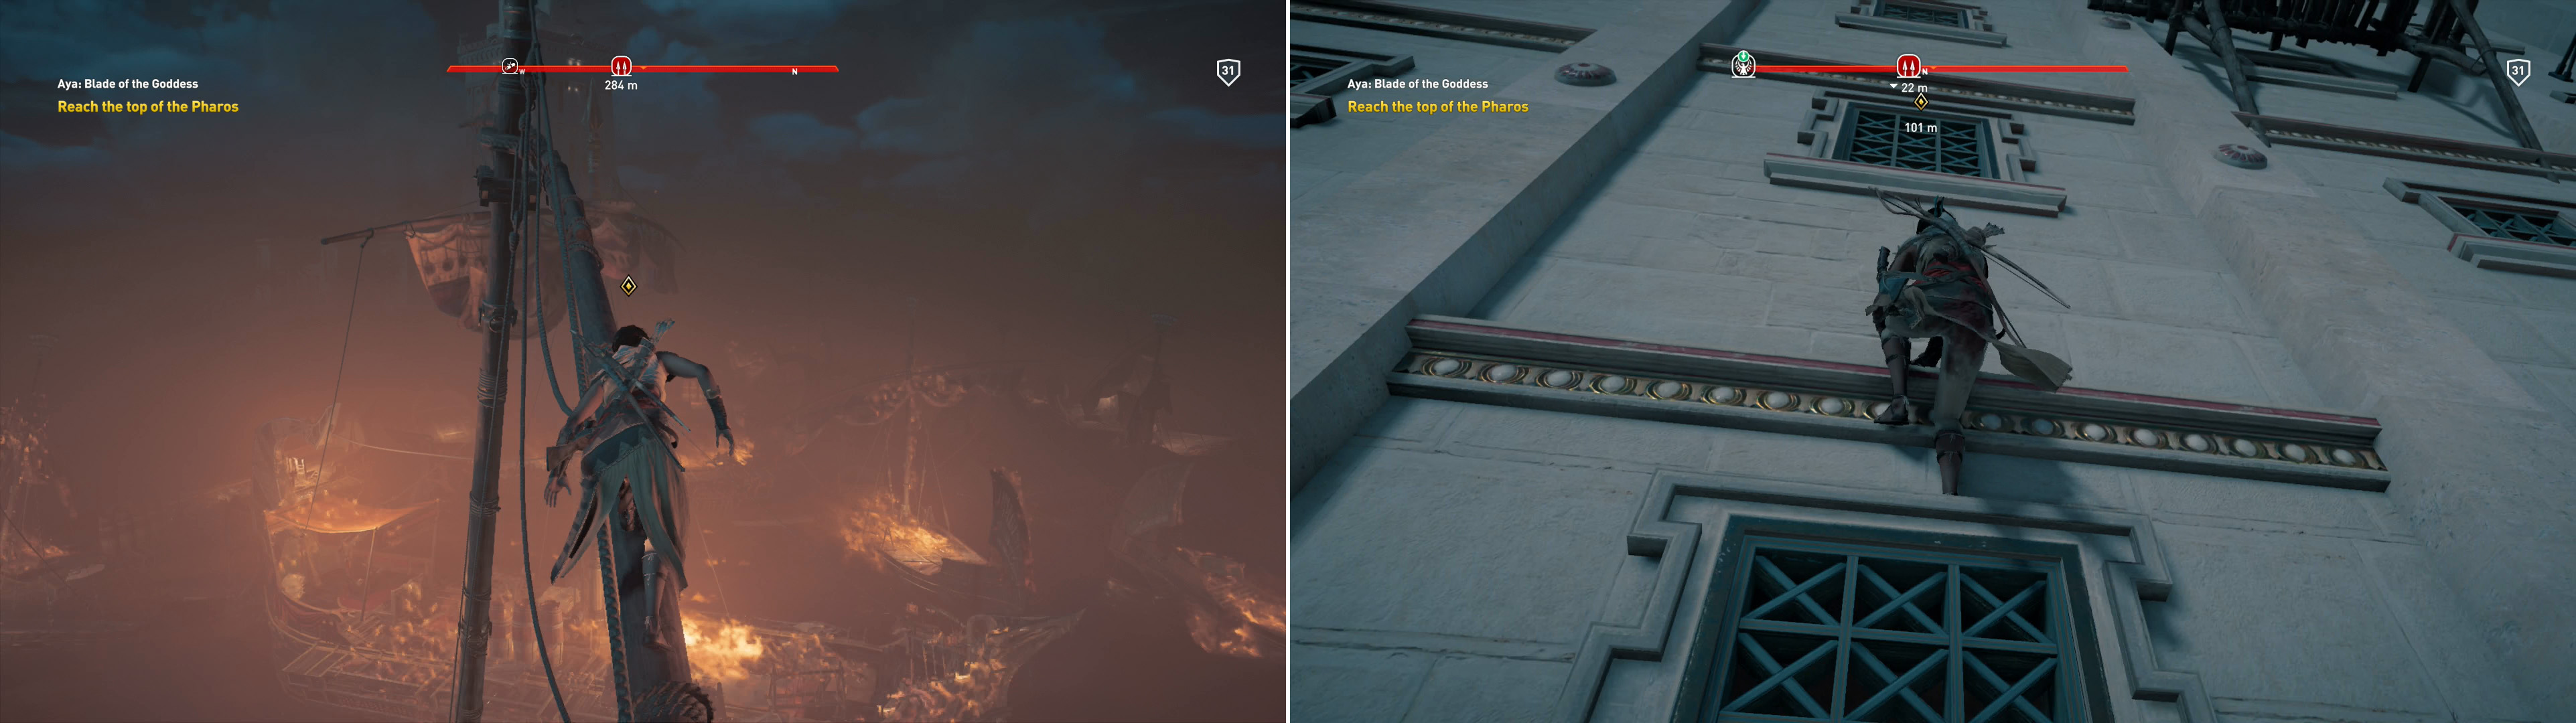 Cross over the masts of a burning fleet (left), then climb the Pharos (right).